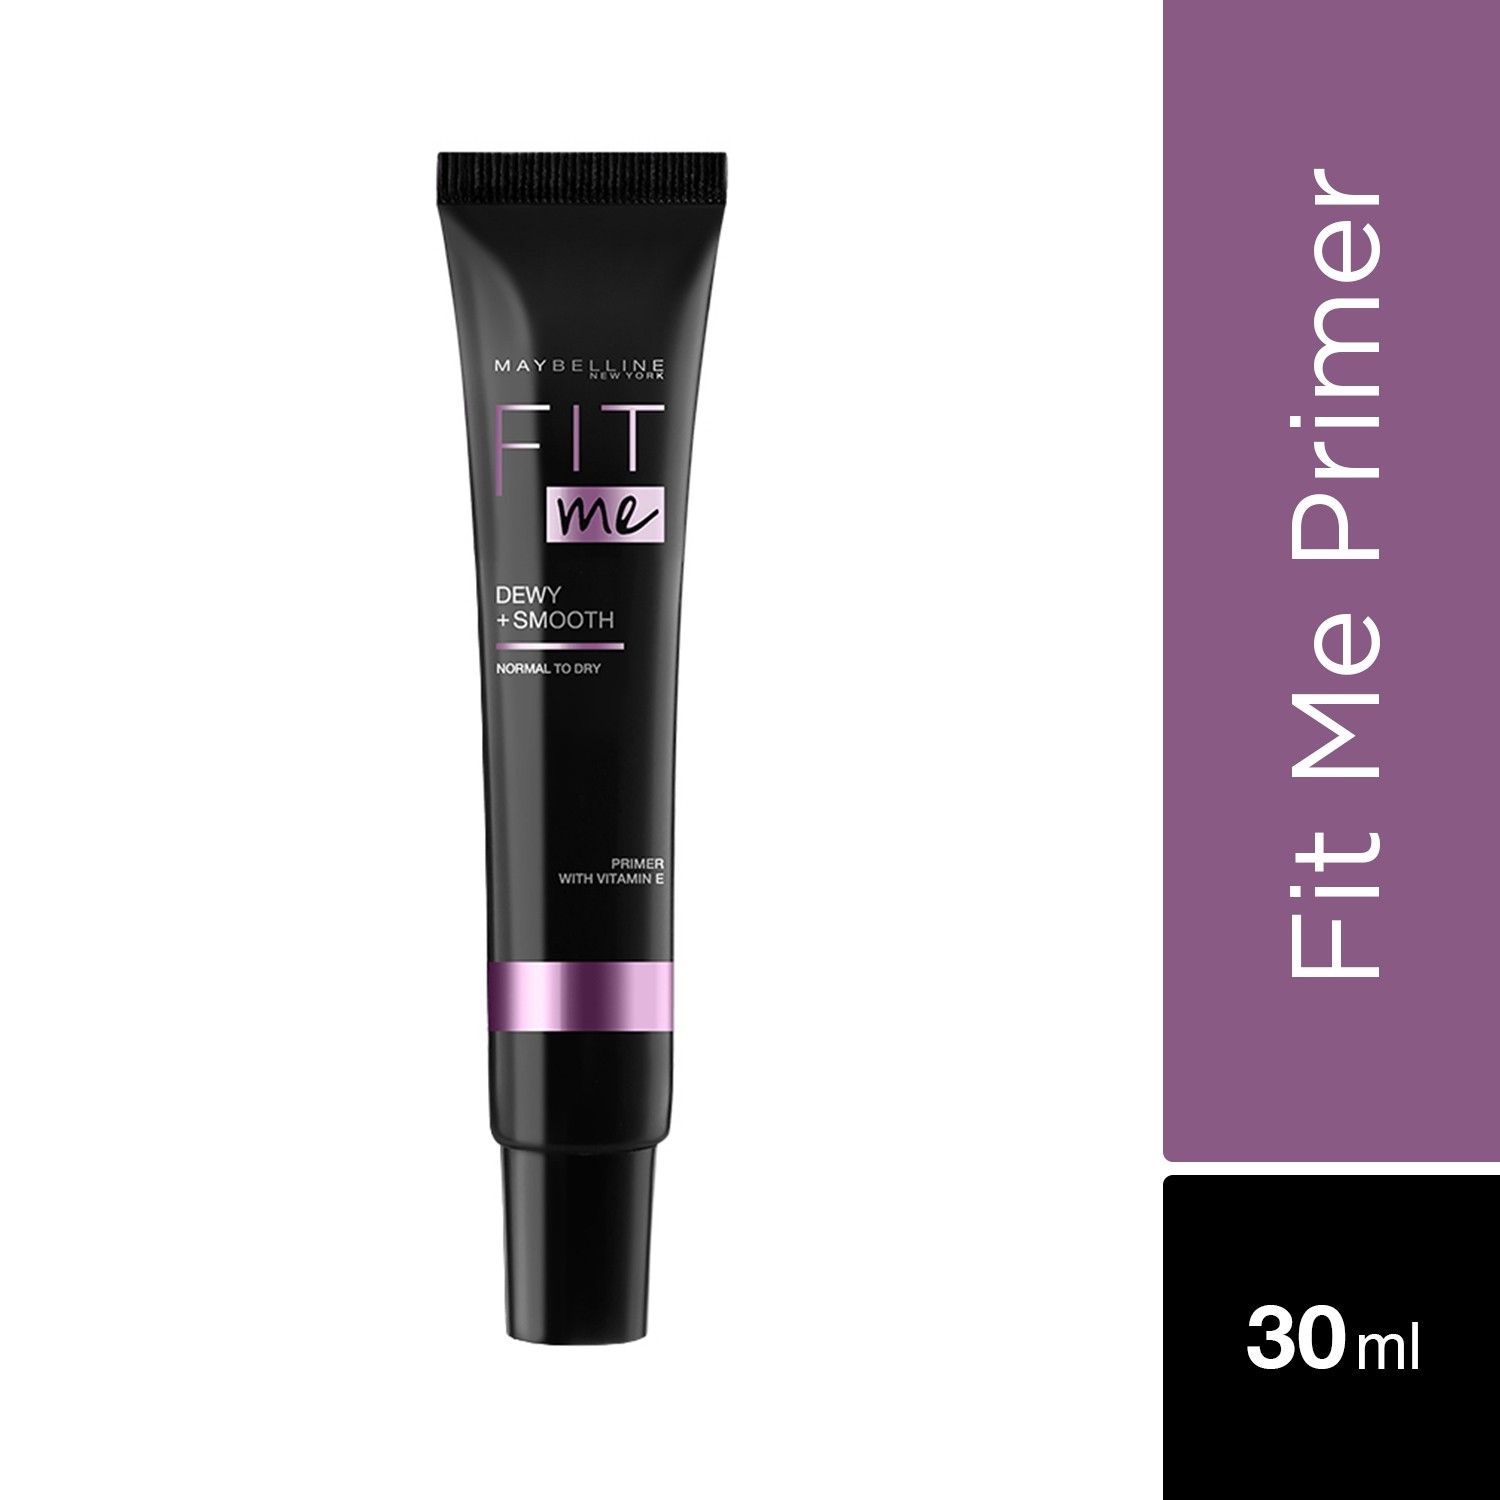 Maybelline New York | Maybelline New York Fit Me Dewy + Smooth Primer (30ml)